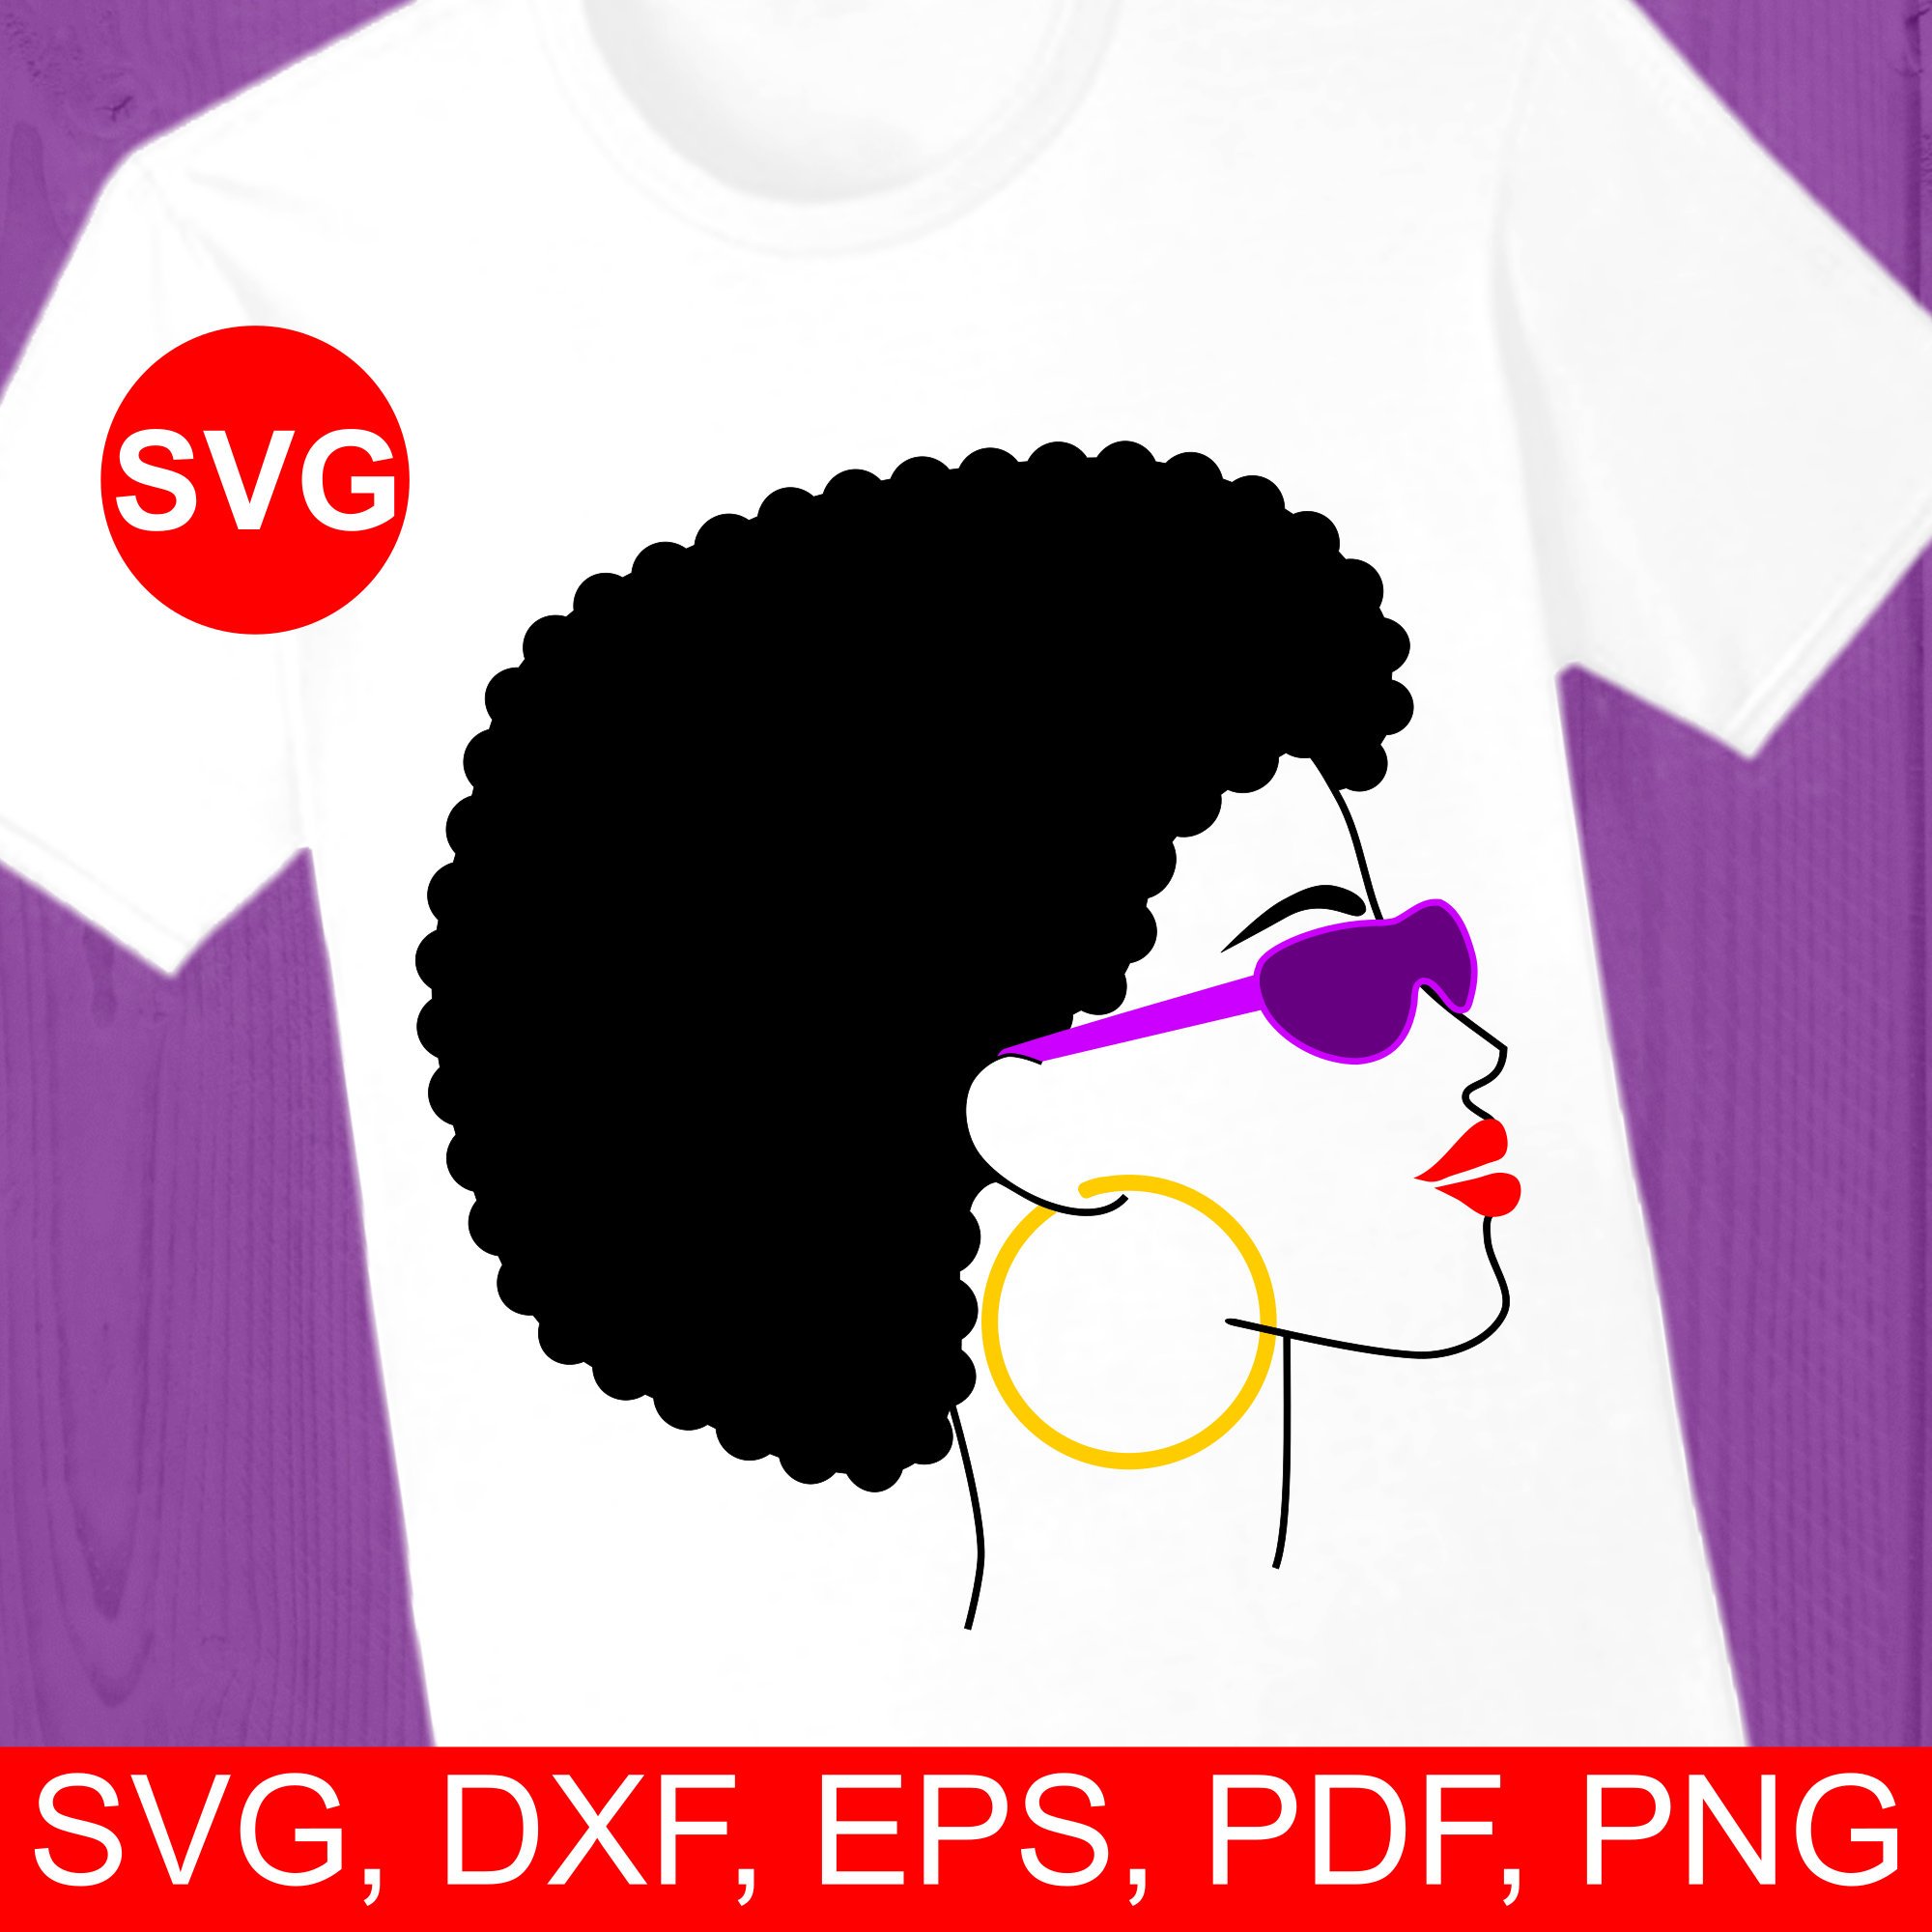 afro clipart funky